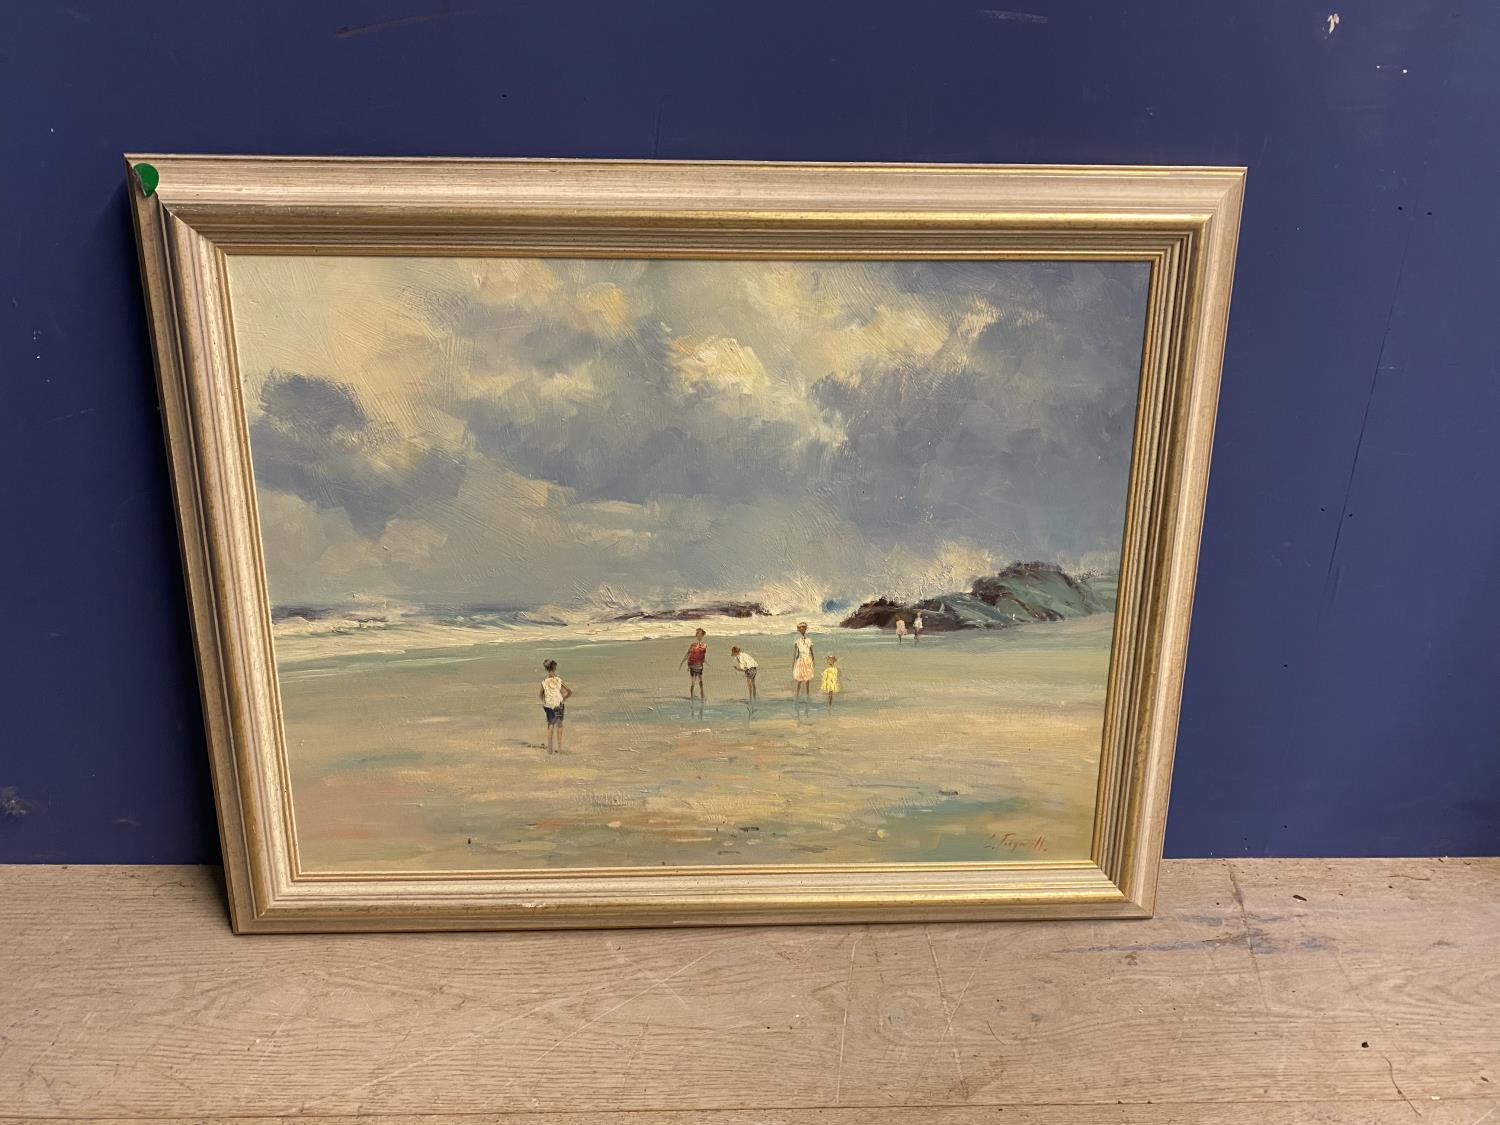 L.TUGWELL, C20th modern oil on wood panel Chapmans Bay, Cape signed lower right, titled verso 45 x - Image 2 of 7